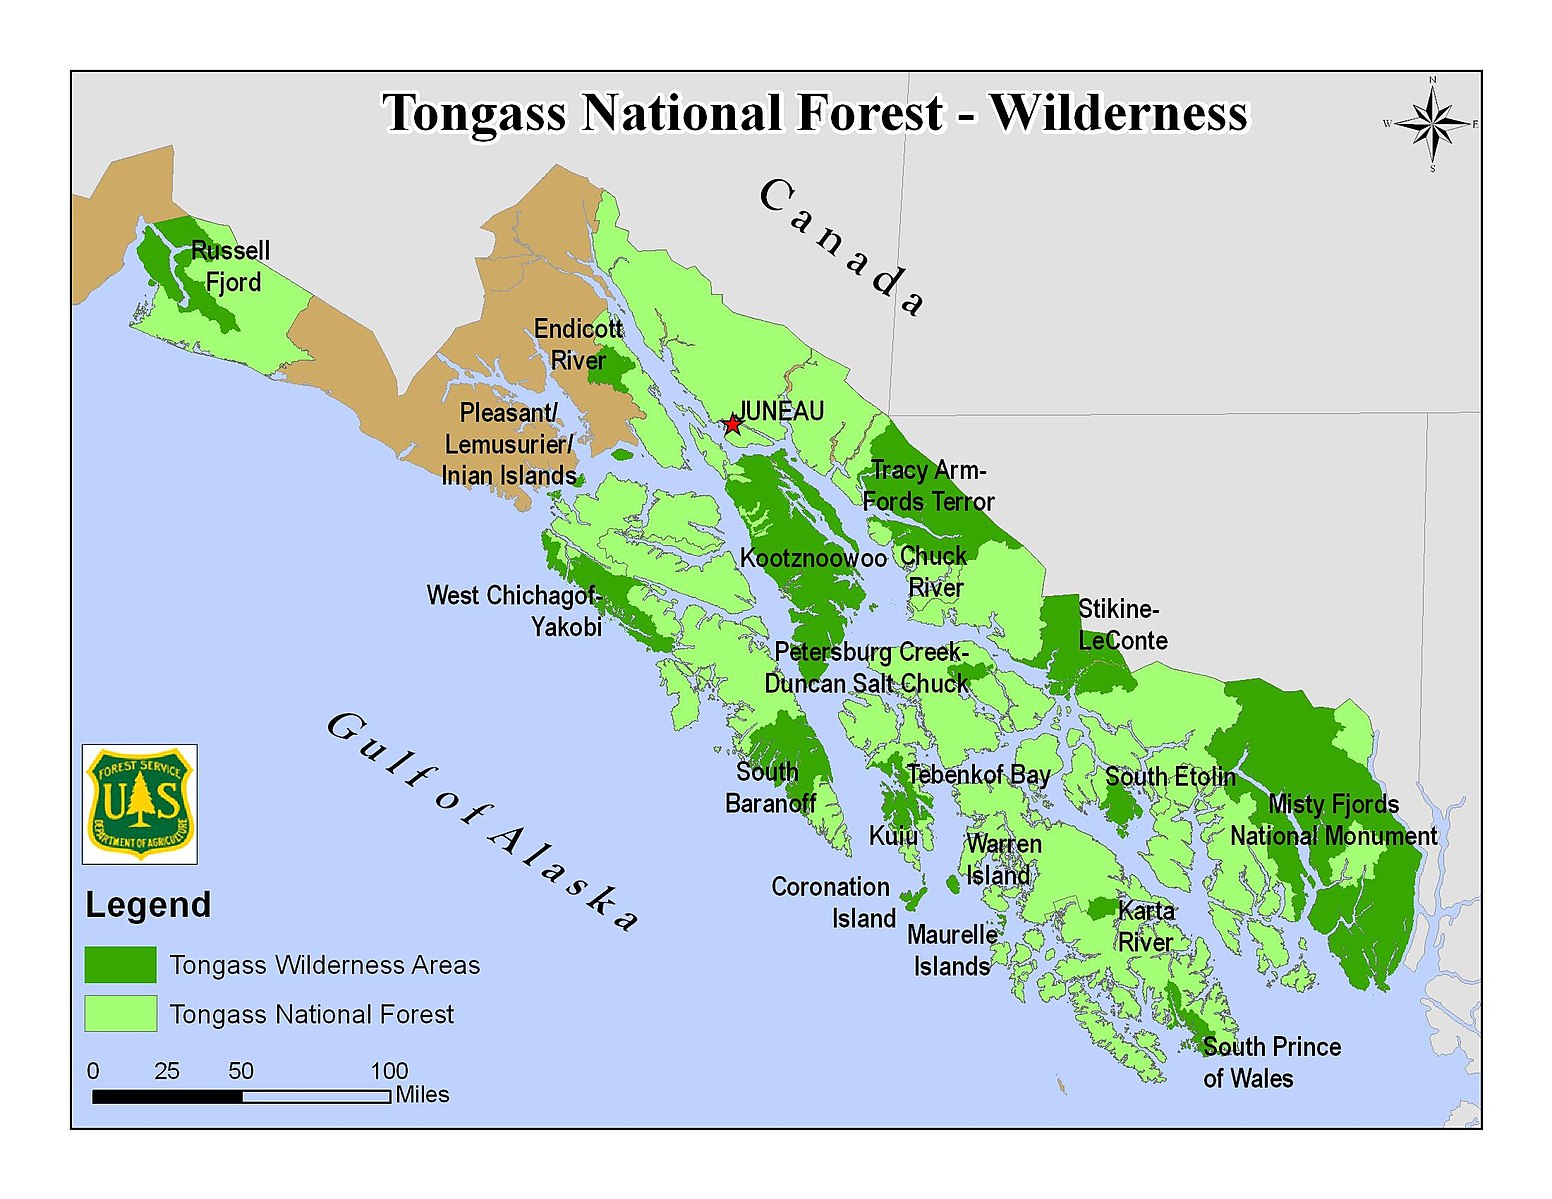 Forest Service map of the Tongass, with National Monuments and Wilderness Areas (Source: Wikipedia)